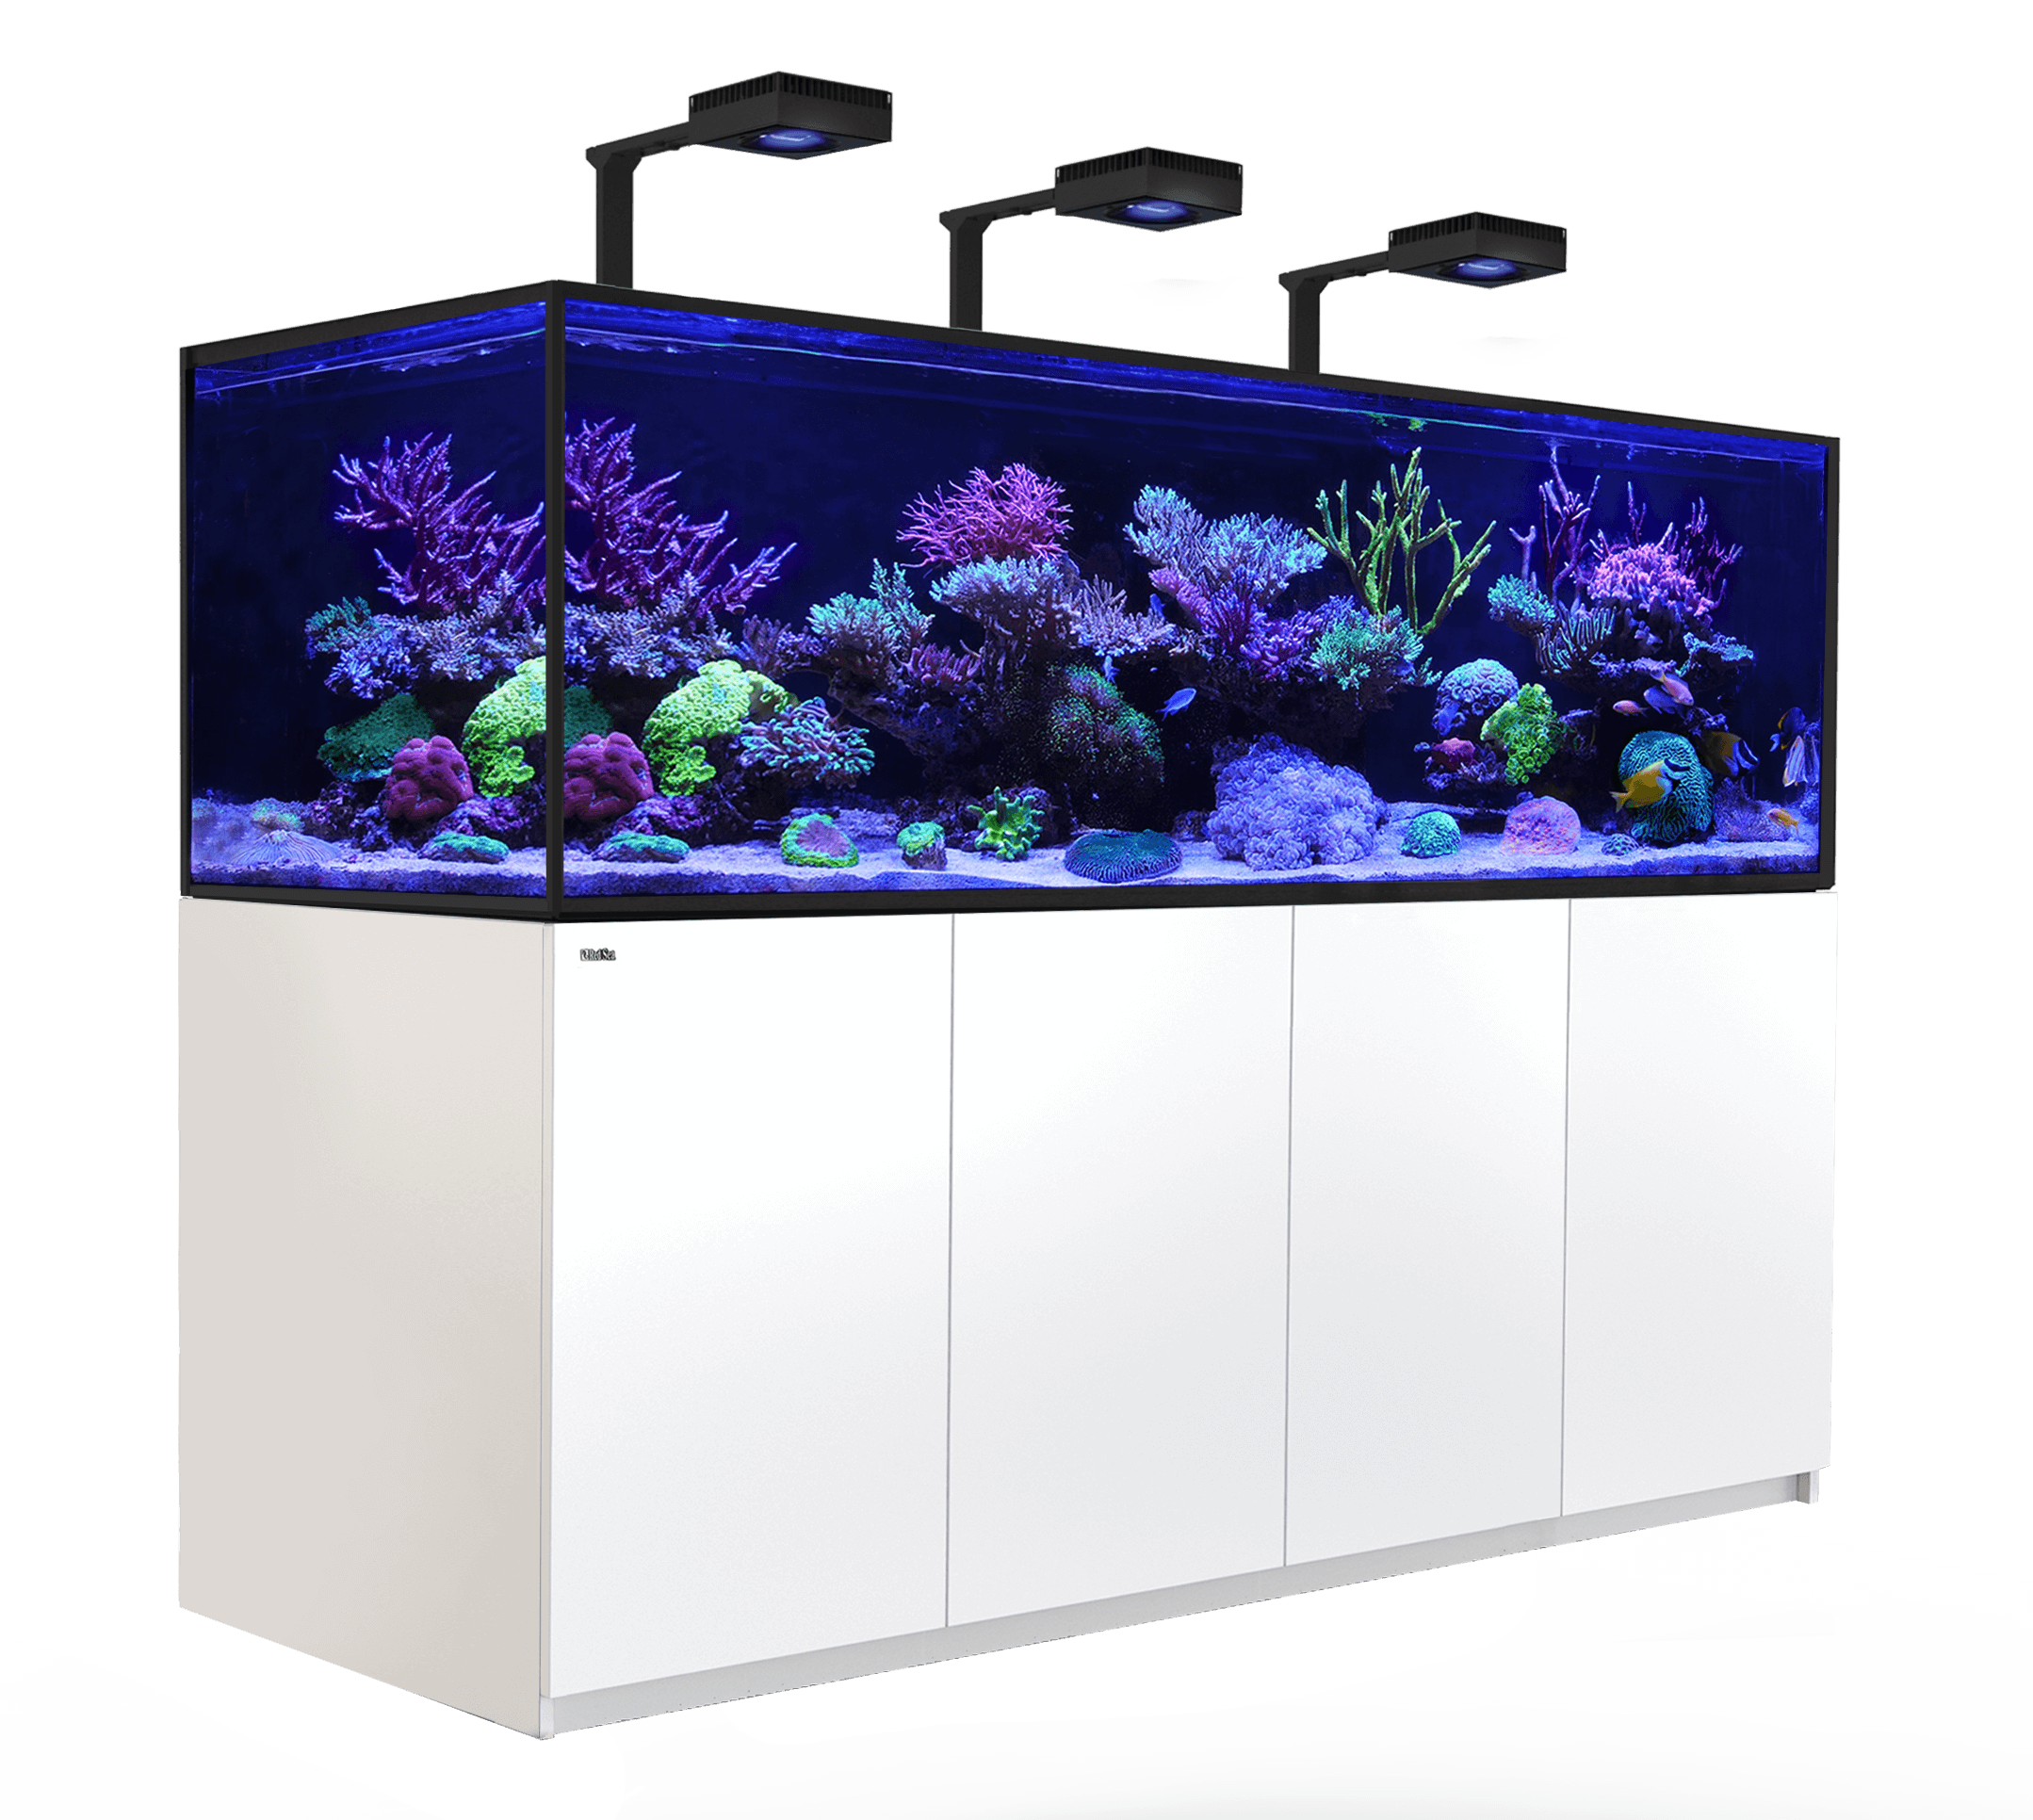 A deluxe REEFER G2+ aquarium system with ReefLED lighting and advanced water management features.